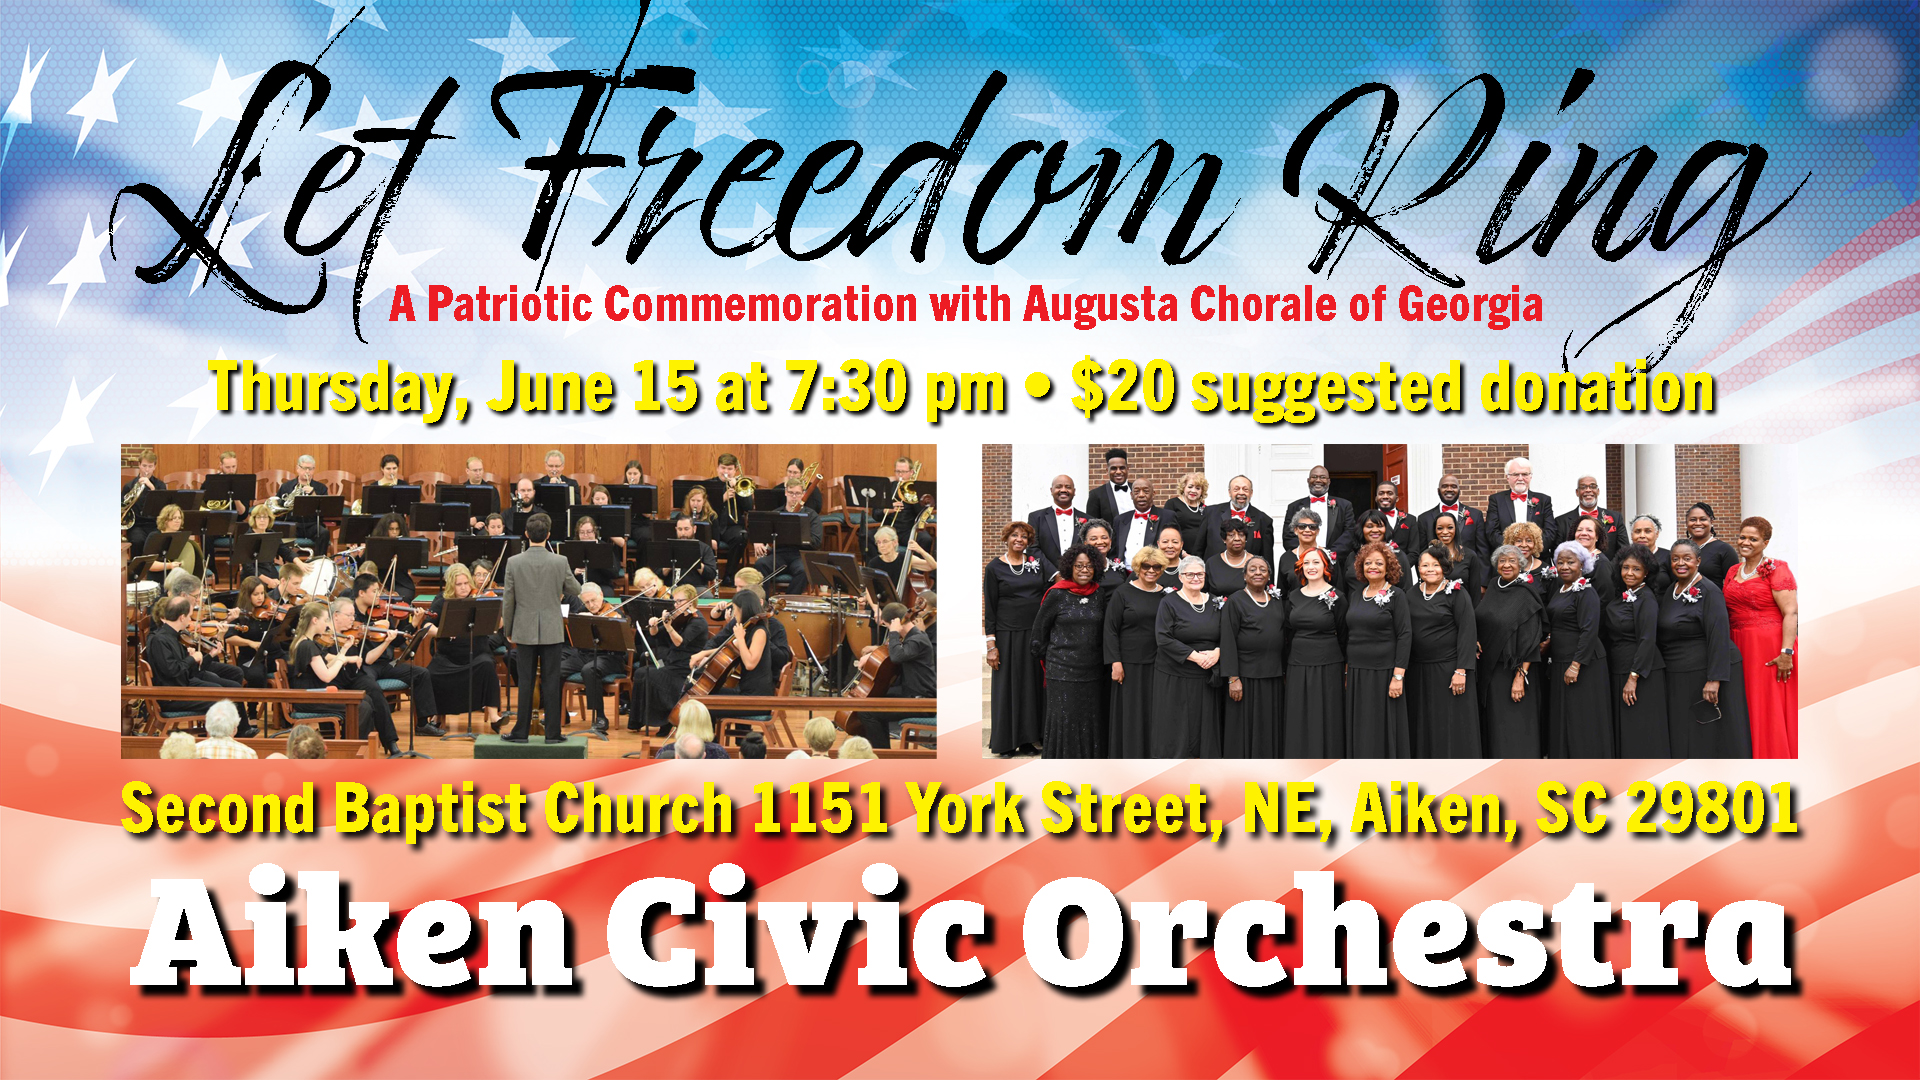 Aiken Civic Orchestra - Let Freedom Ring concert with the Augusta Chorale